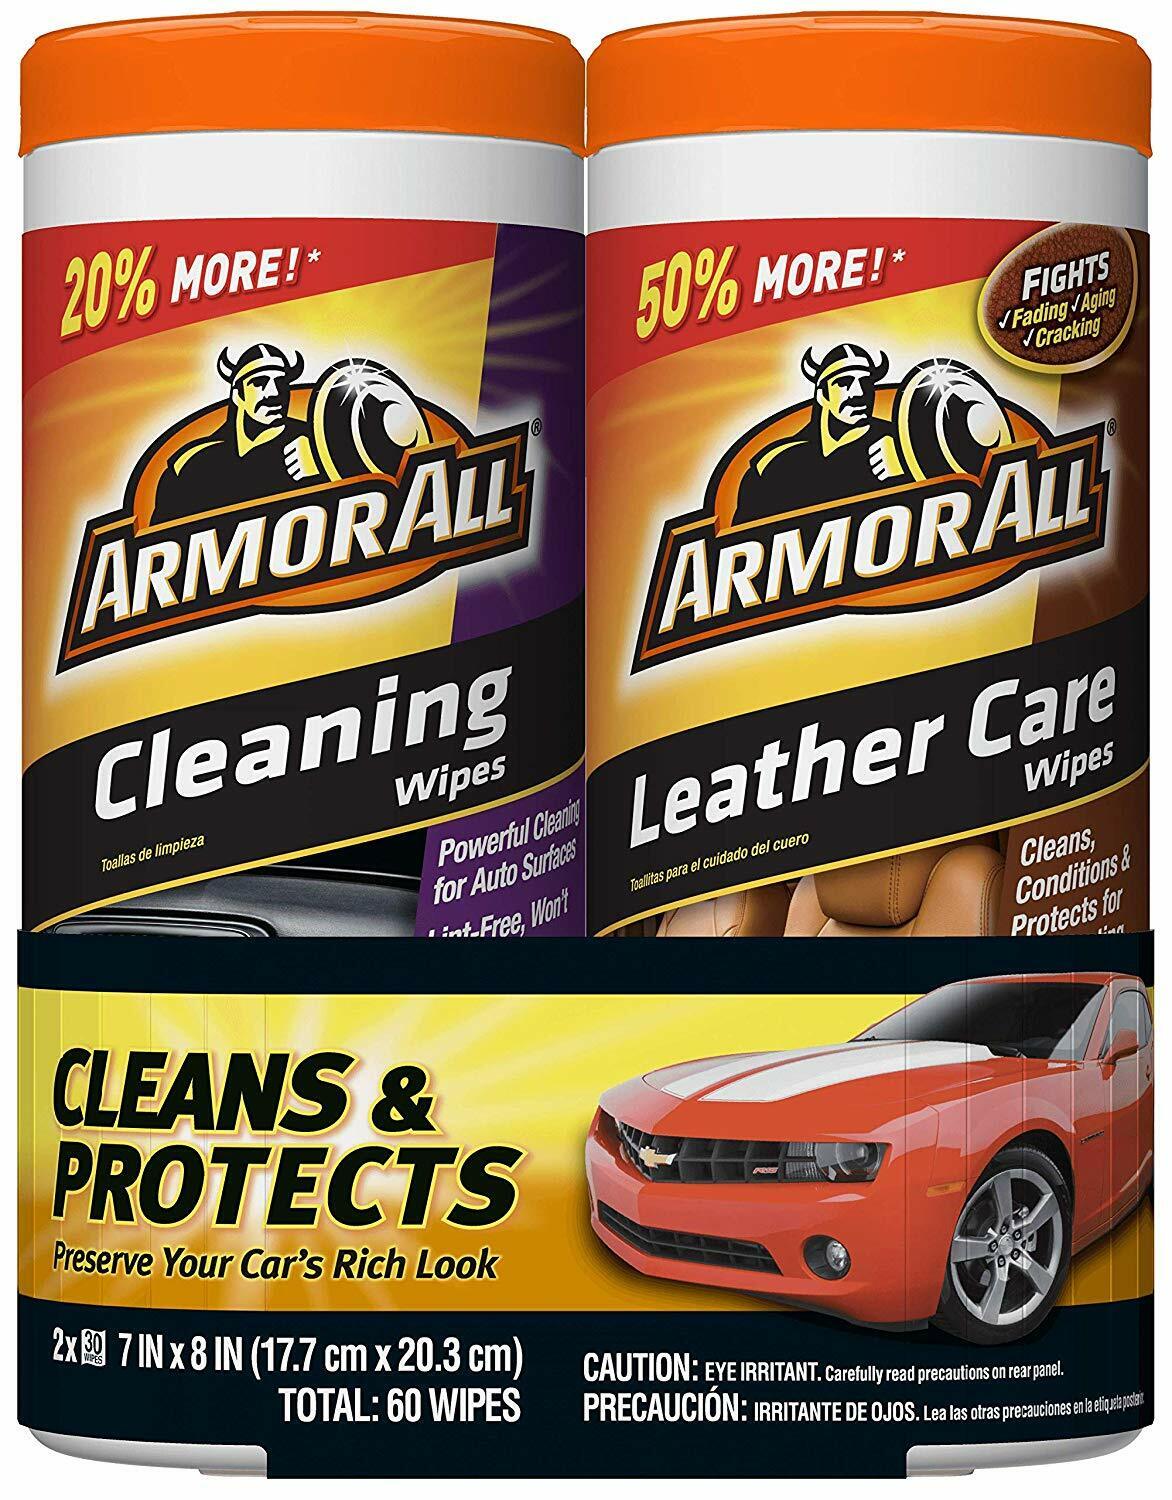 Armor All Cleaning and Leather Care Wipes, 30 Count Each (Pack of 2)